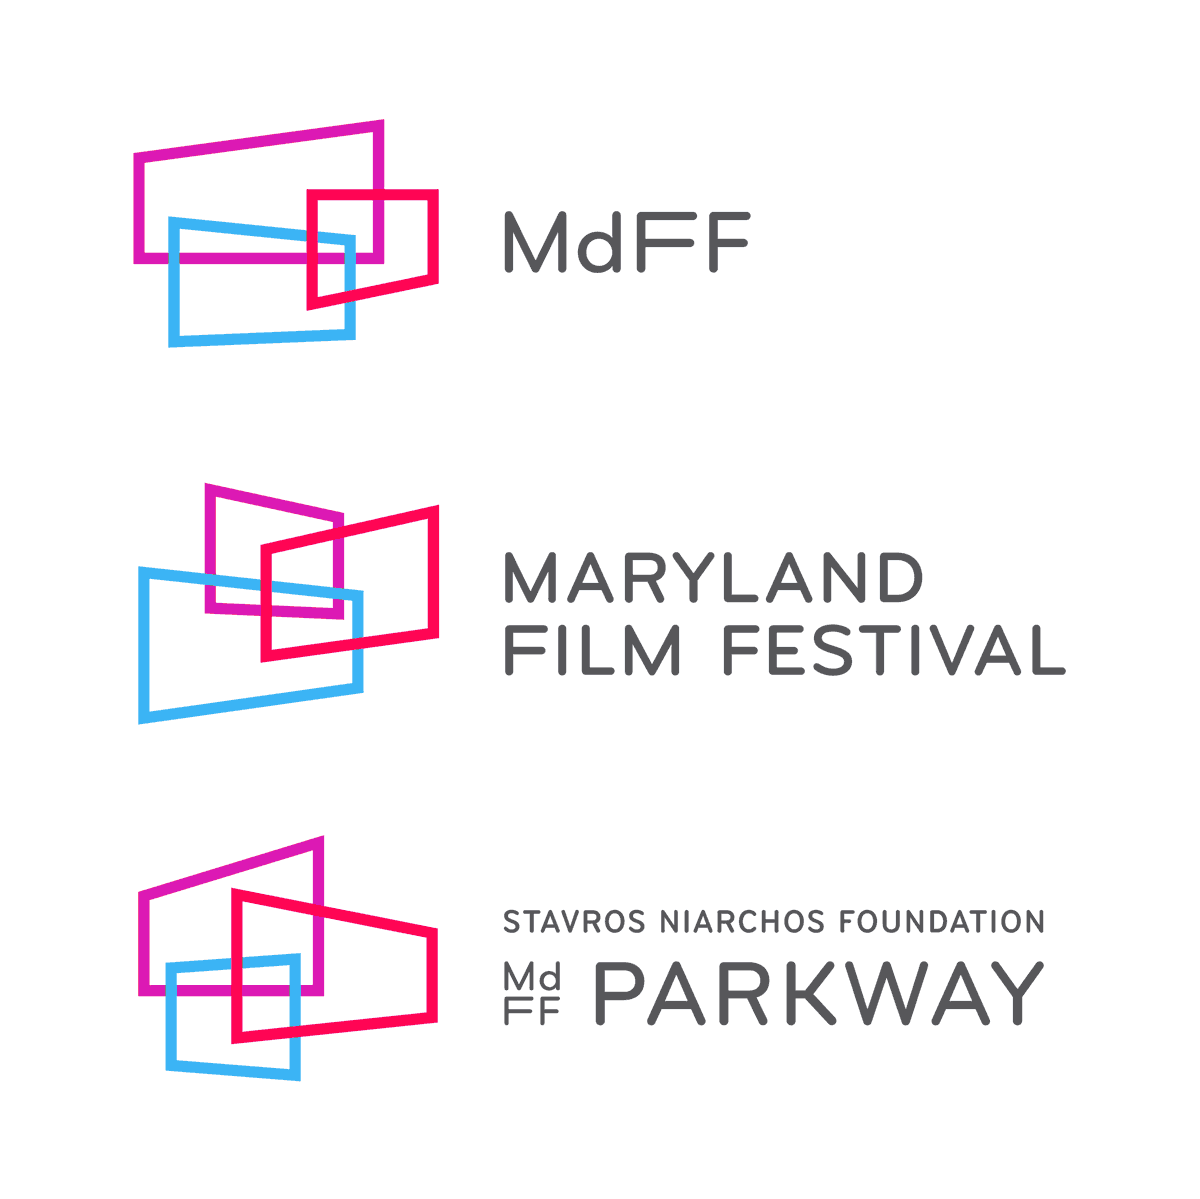 MdFF flexible brand identity and logos for a film festival and movie theater